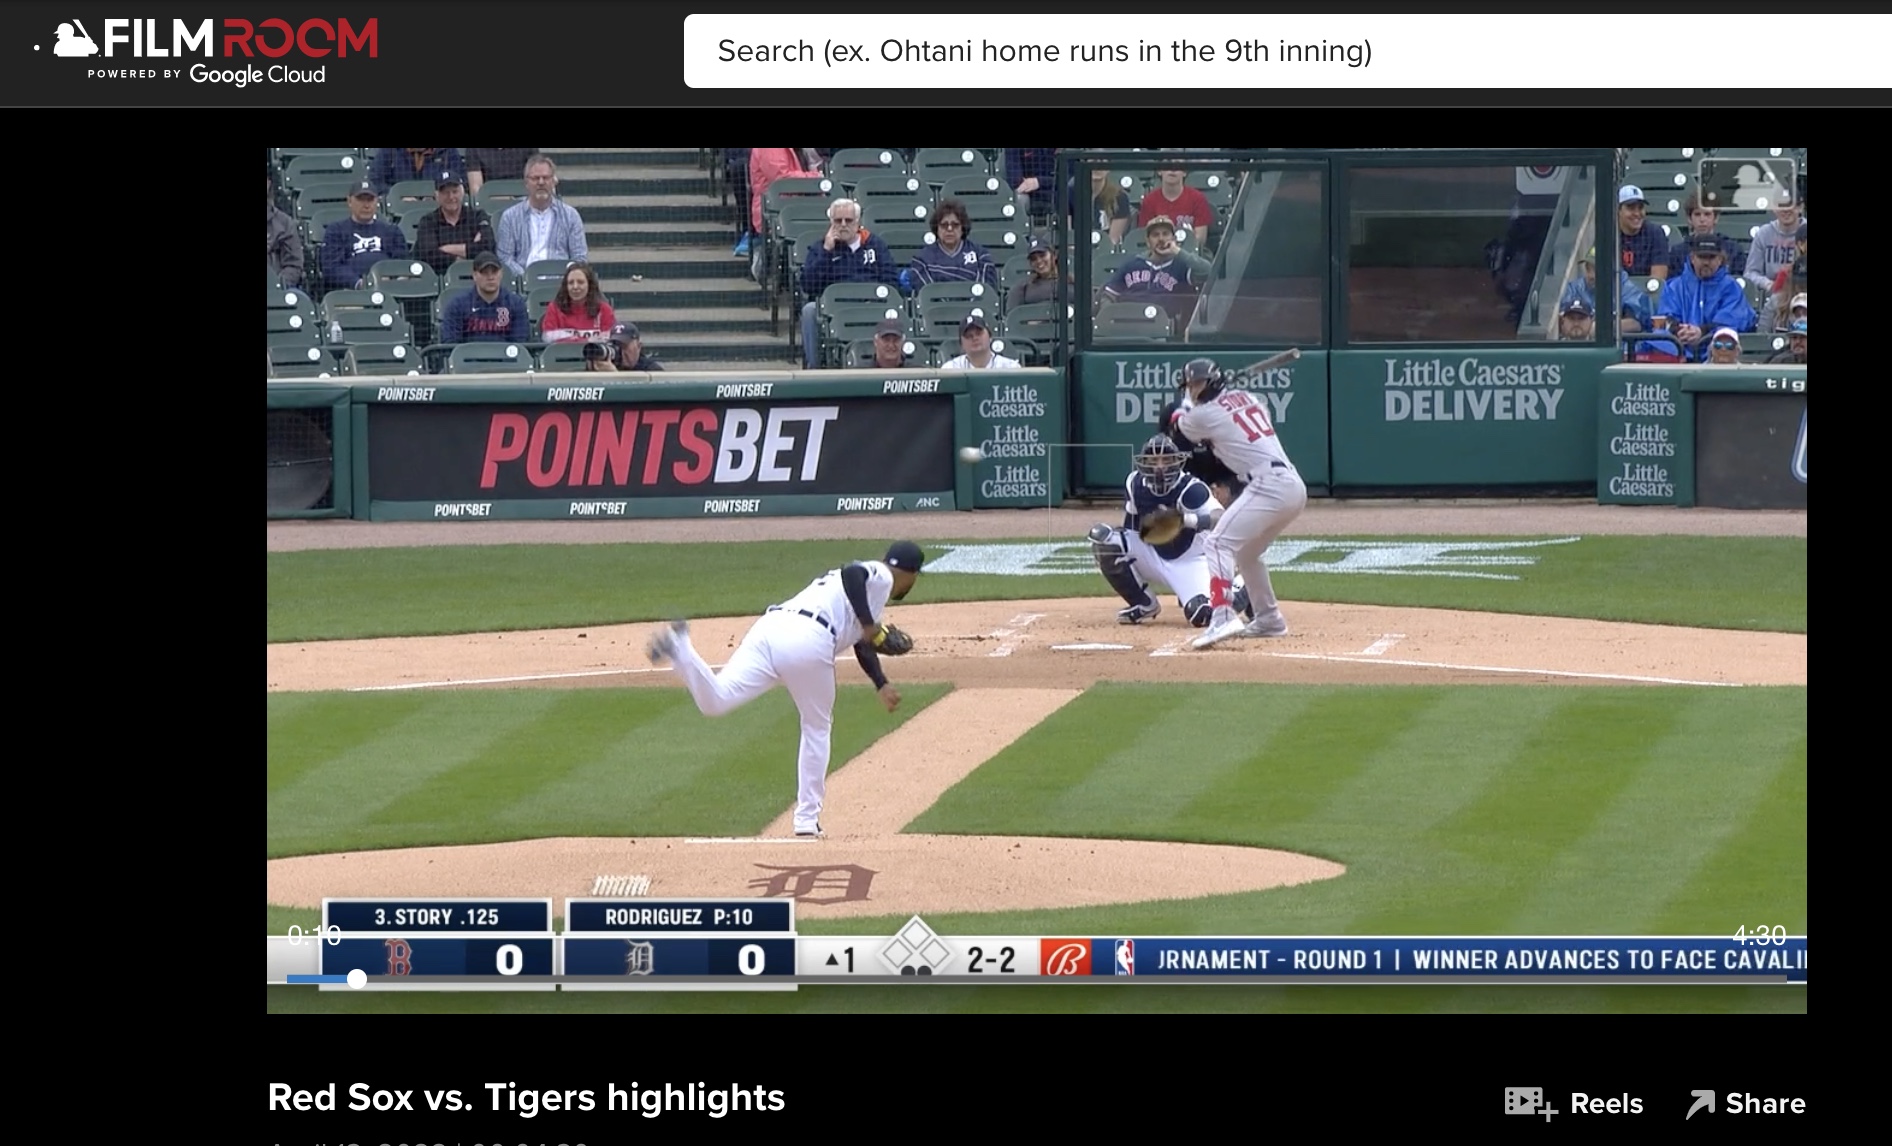 MLB's Film Room lets you find clips from games with extremely granular search tools.